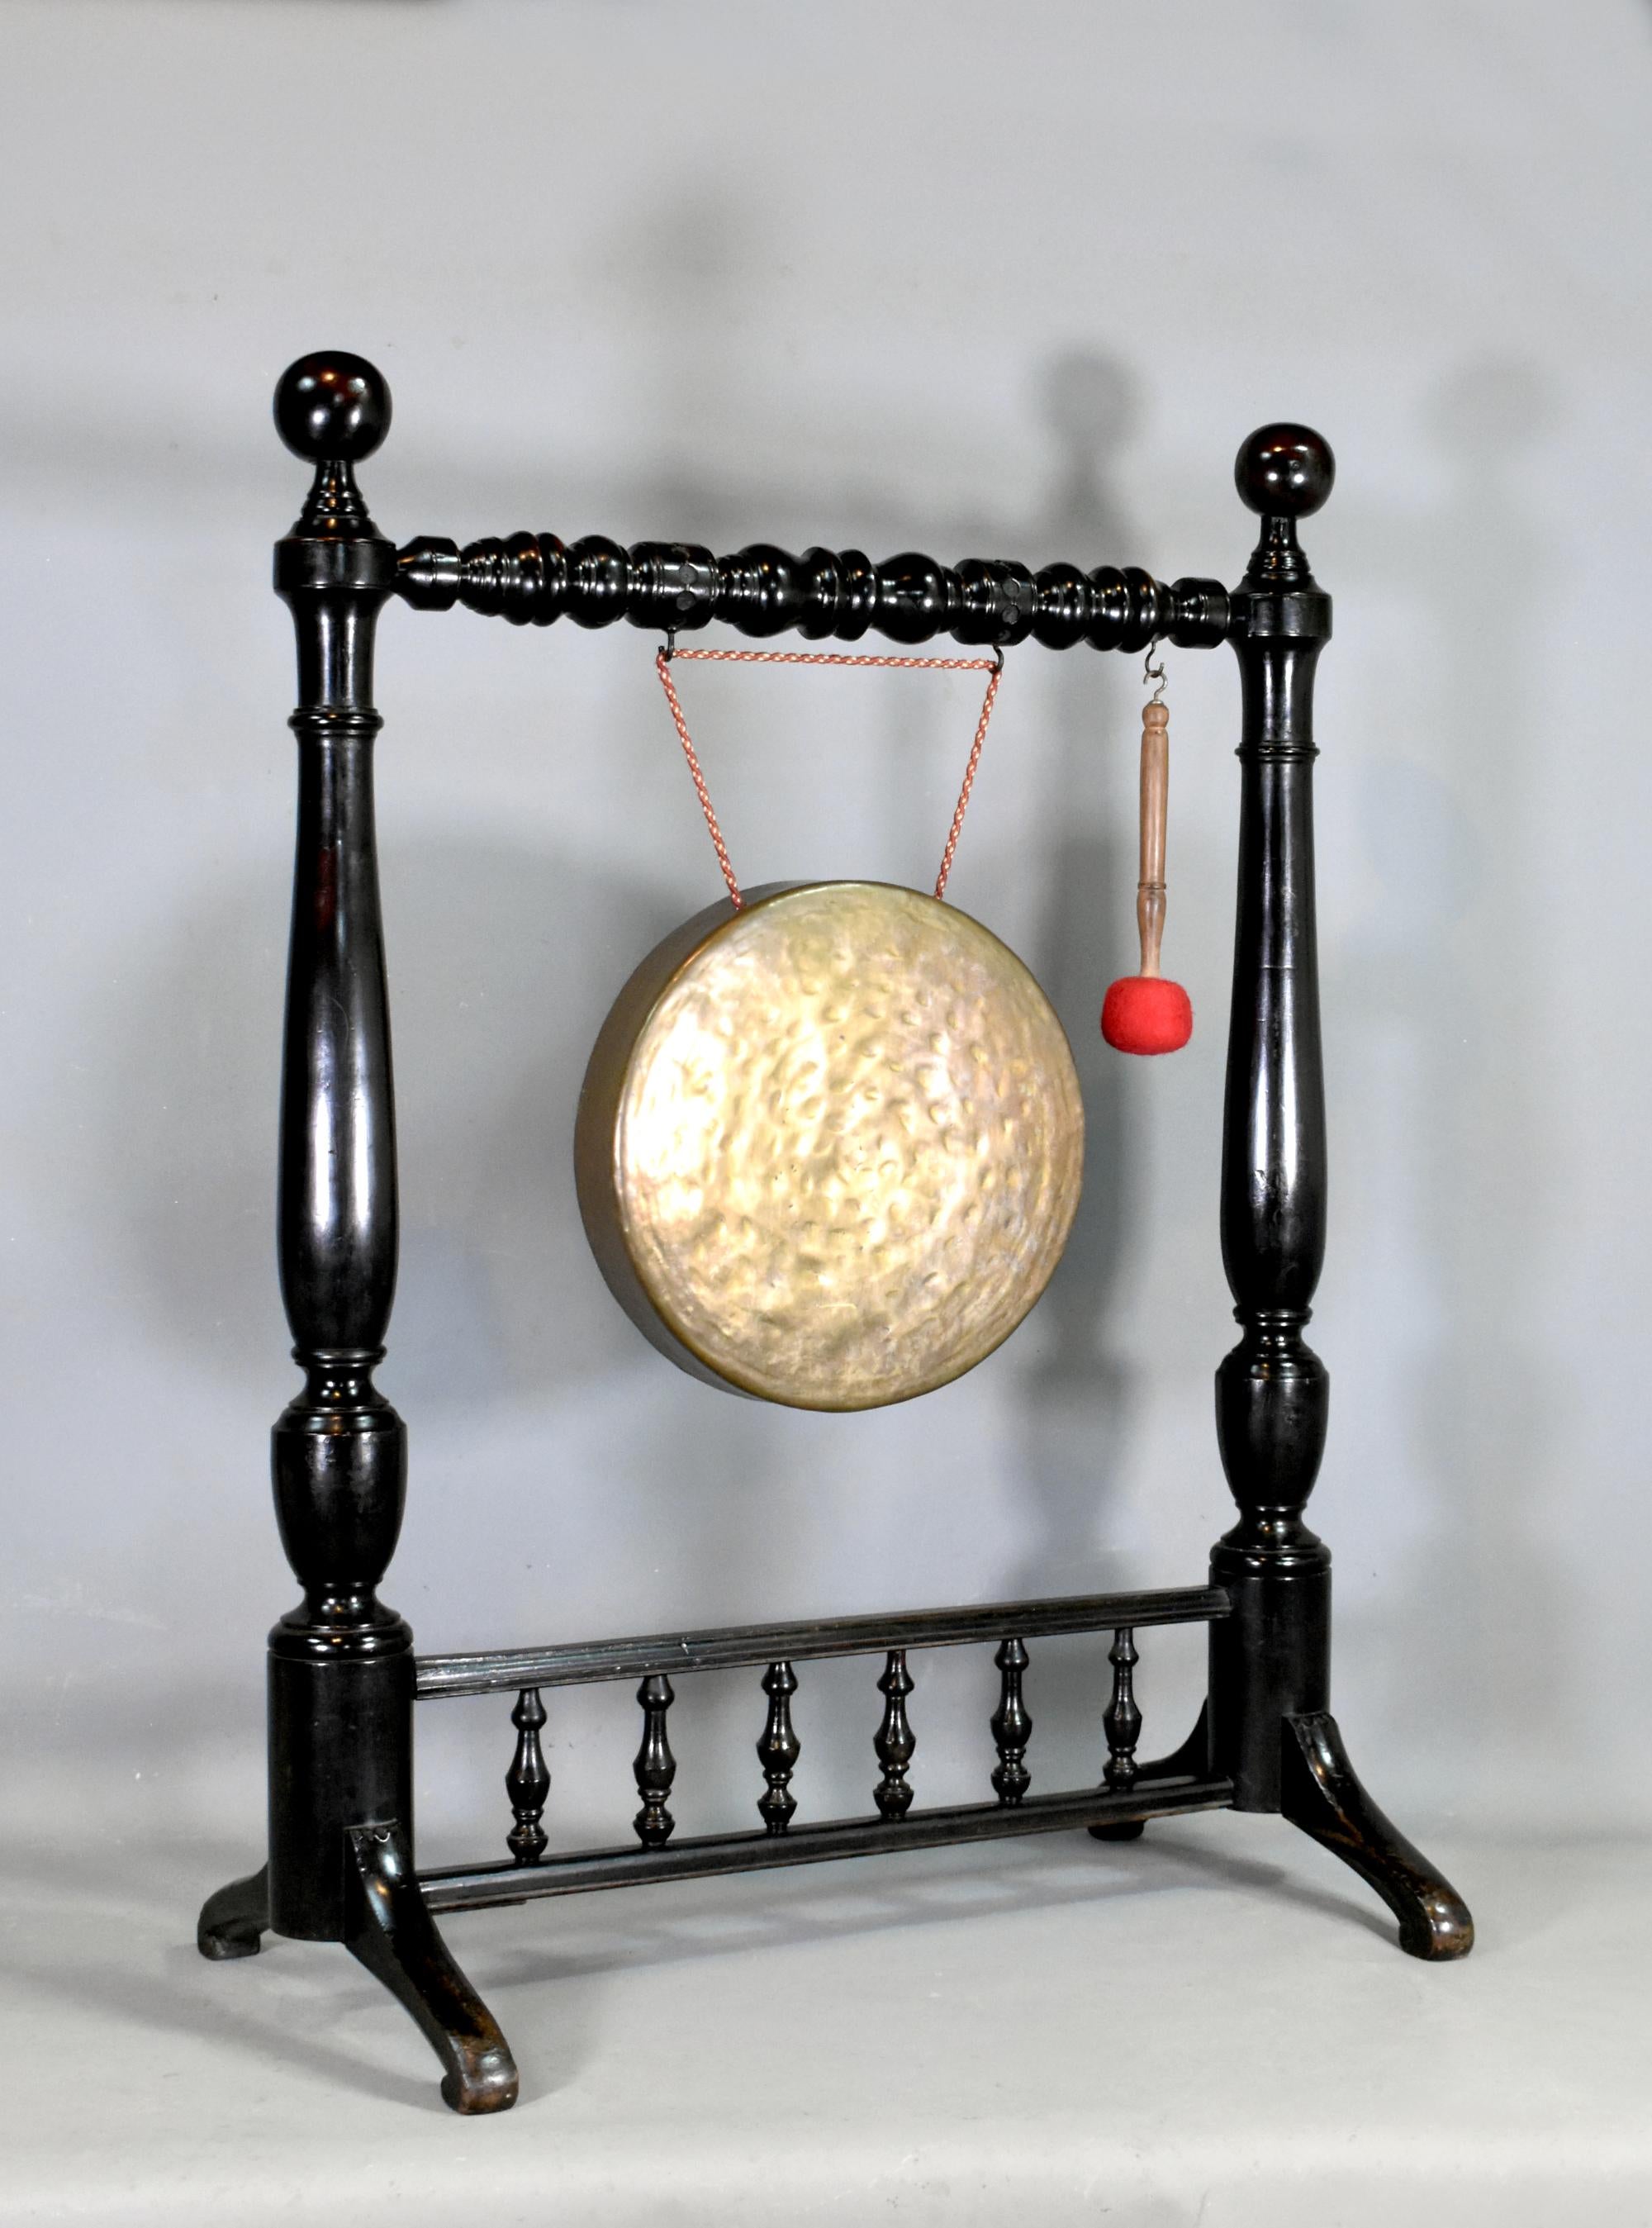 Large Framed Dinner Gong in Mahogany 

This impressive bronze gong hangs from a well-crafted turned stand. 

The original hand-crafted gong offers a substantial sound, when struck with the hammer / beater. 

The outer columns are turned, very sturdy